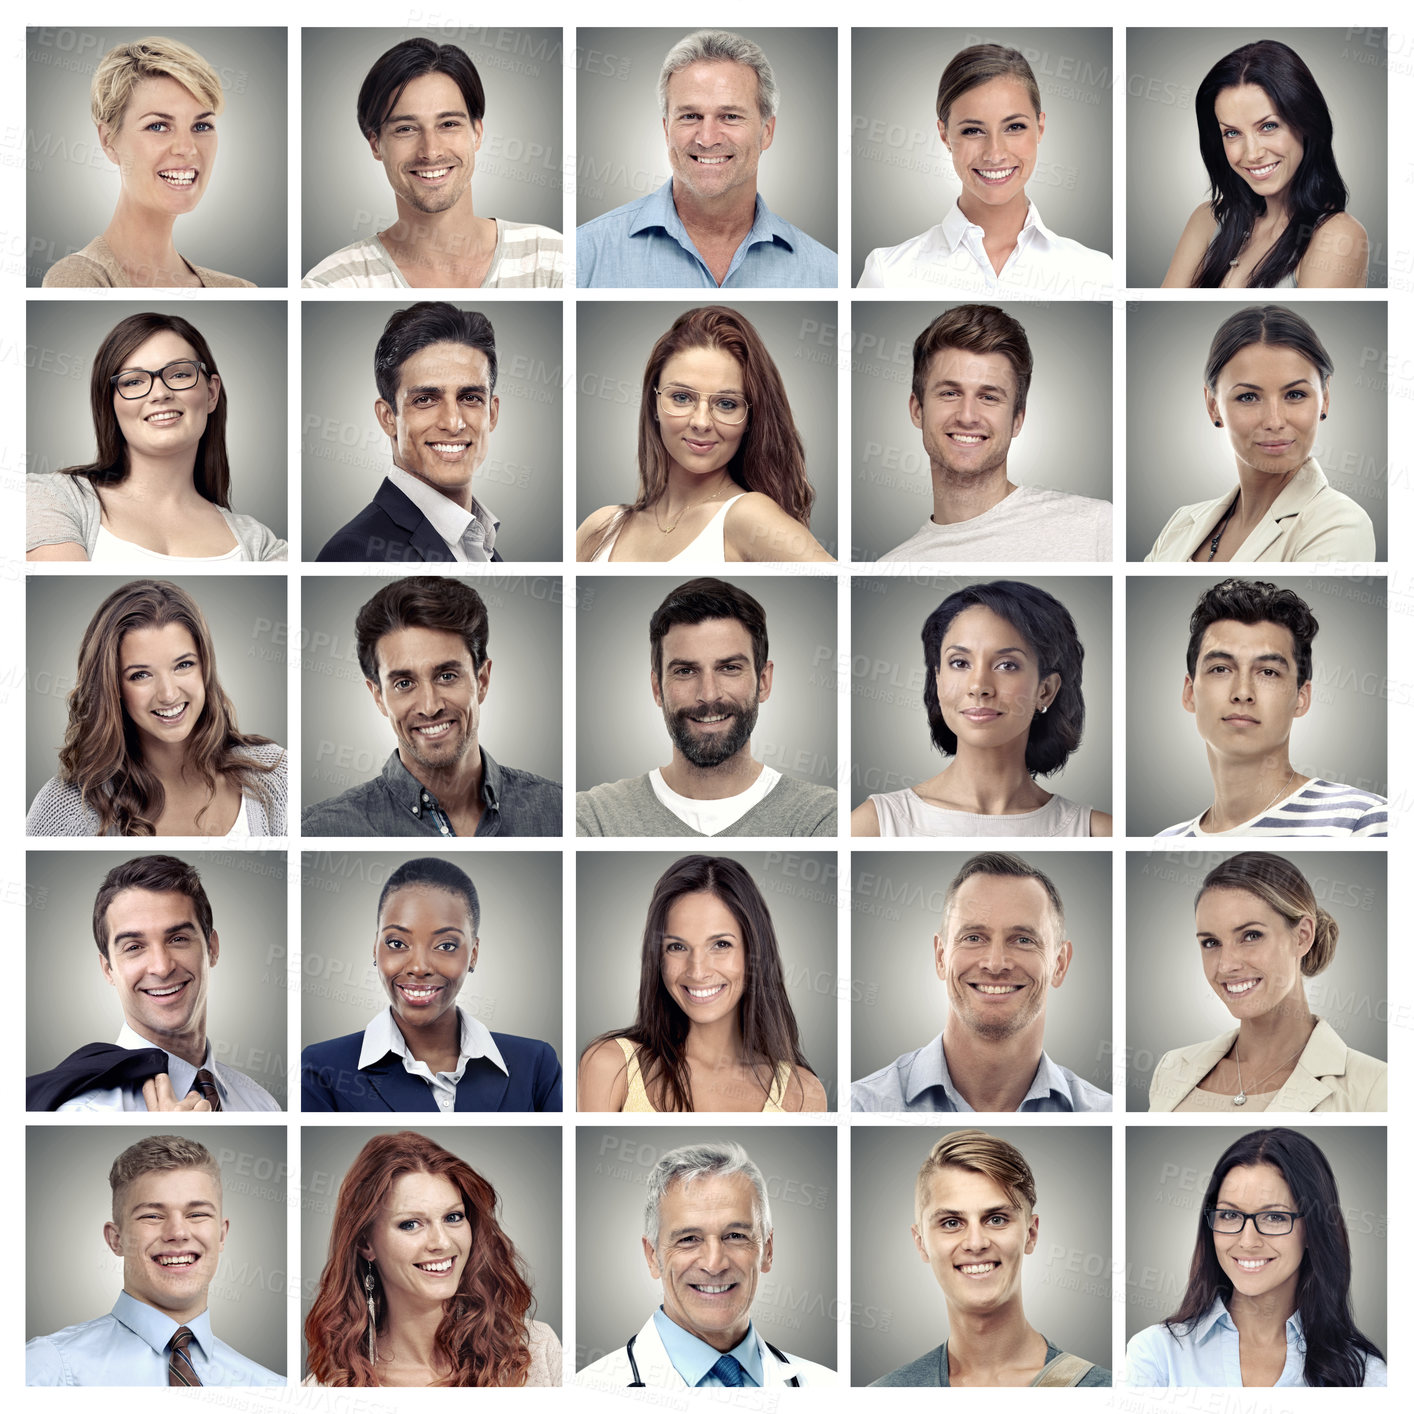 Buy stock photo Face collage, diversity portrait people and collection of happy community, society or group mosaic. Profession headshot, profile picture montage and global men and women isolated on studio background